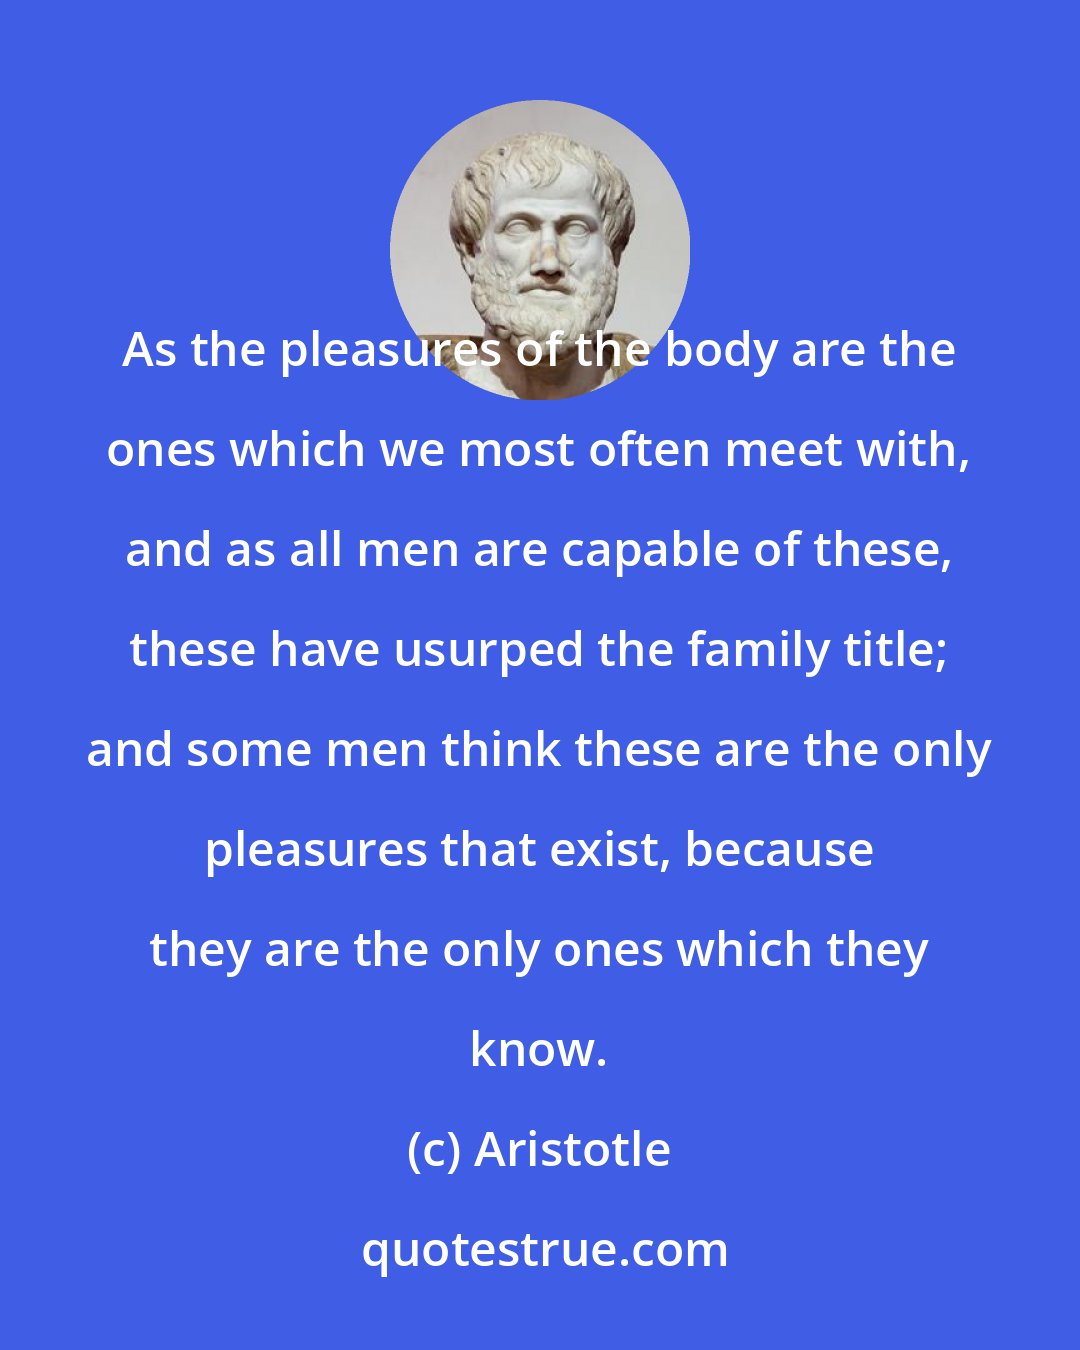 Aristotle: As the pleasures of the body are the ones which we most often meet with, and as all men are capable of these, these have usurped the family title; and some men think these are the only pleasures that exist, because they are the only ones which they know.